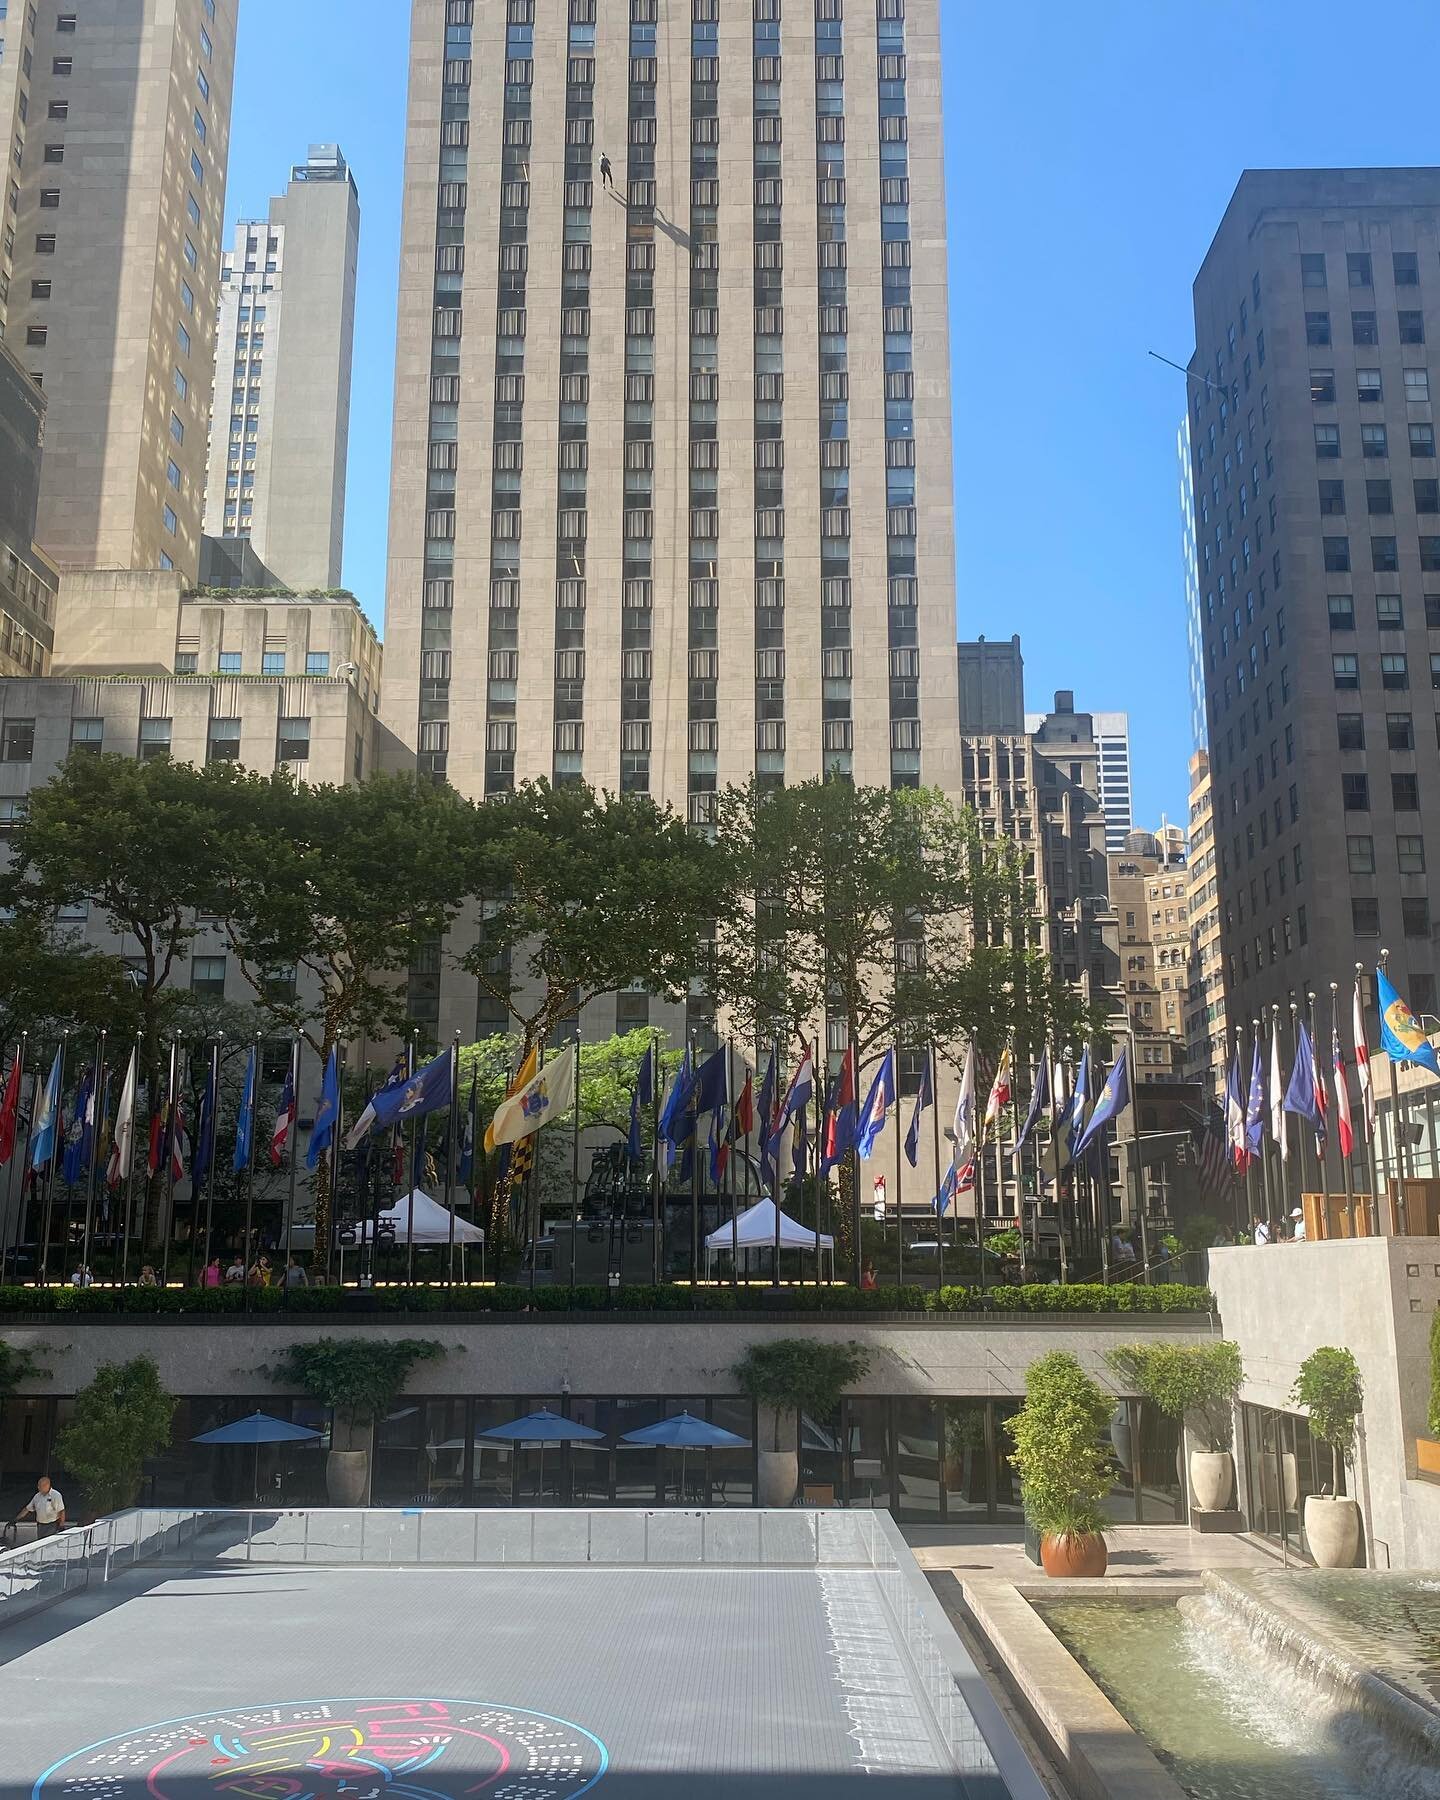 1 Rockefeller Plaza 

9th Cycle FISP Inspection
O8.04.2022